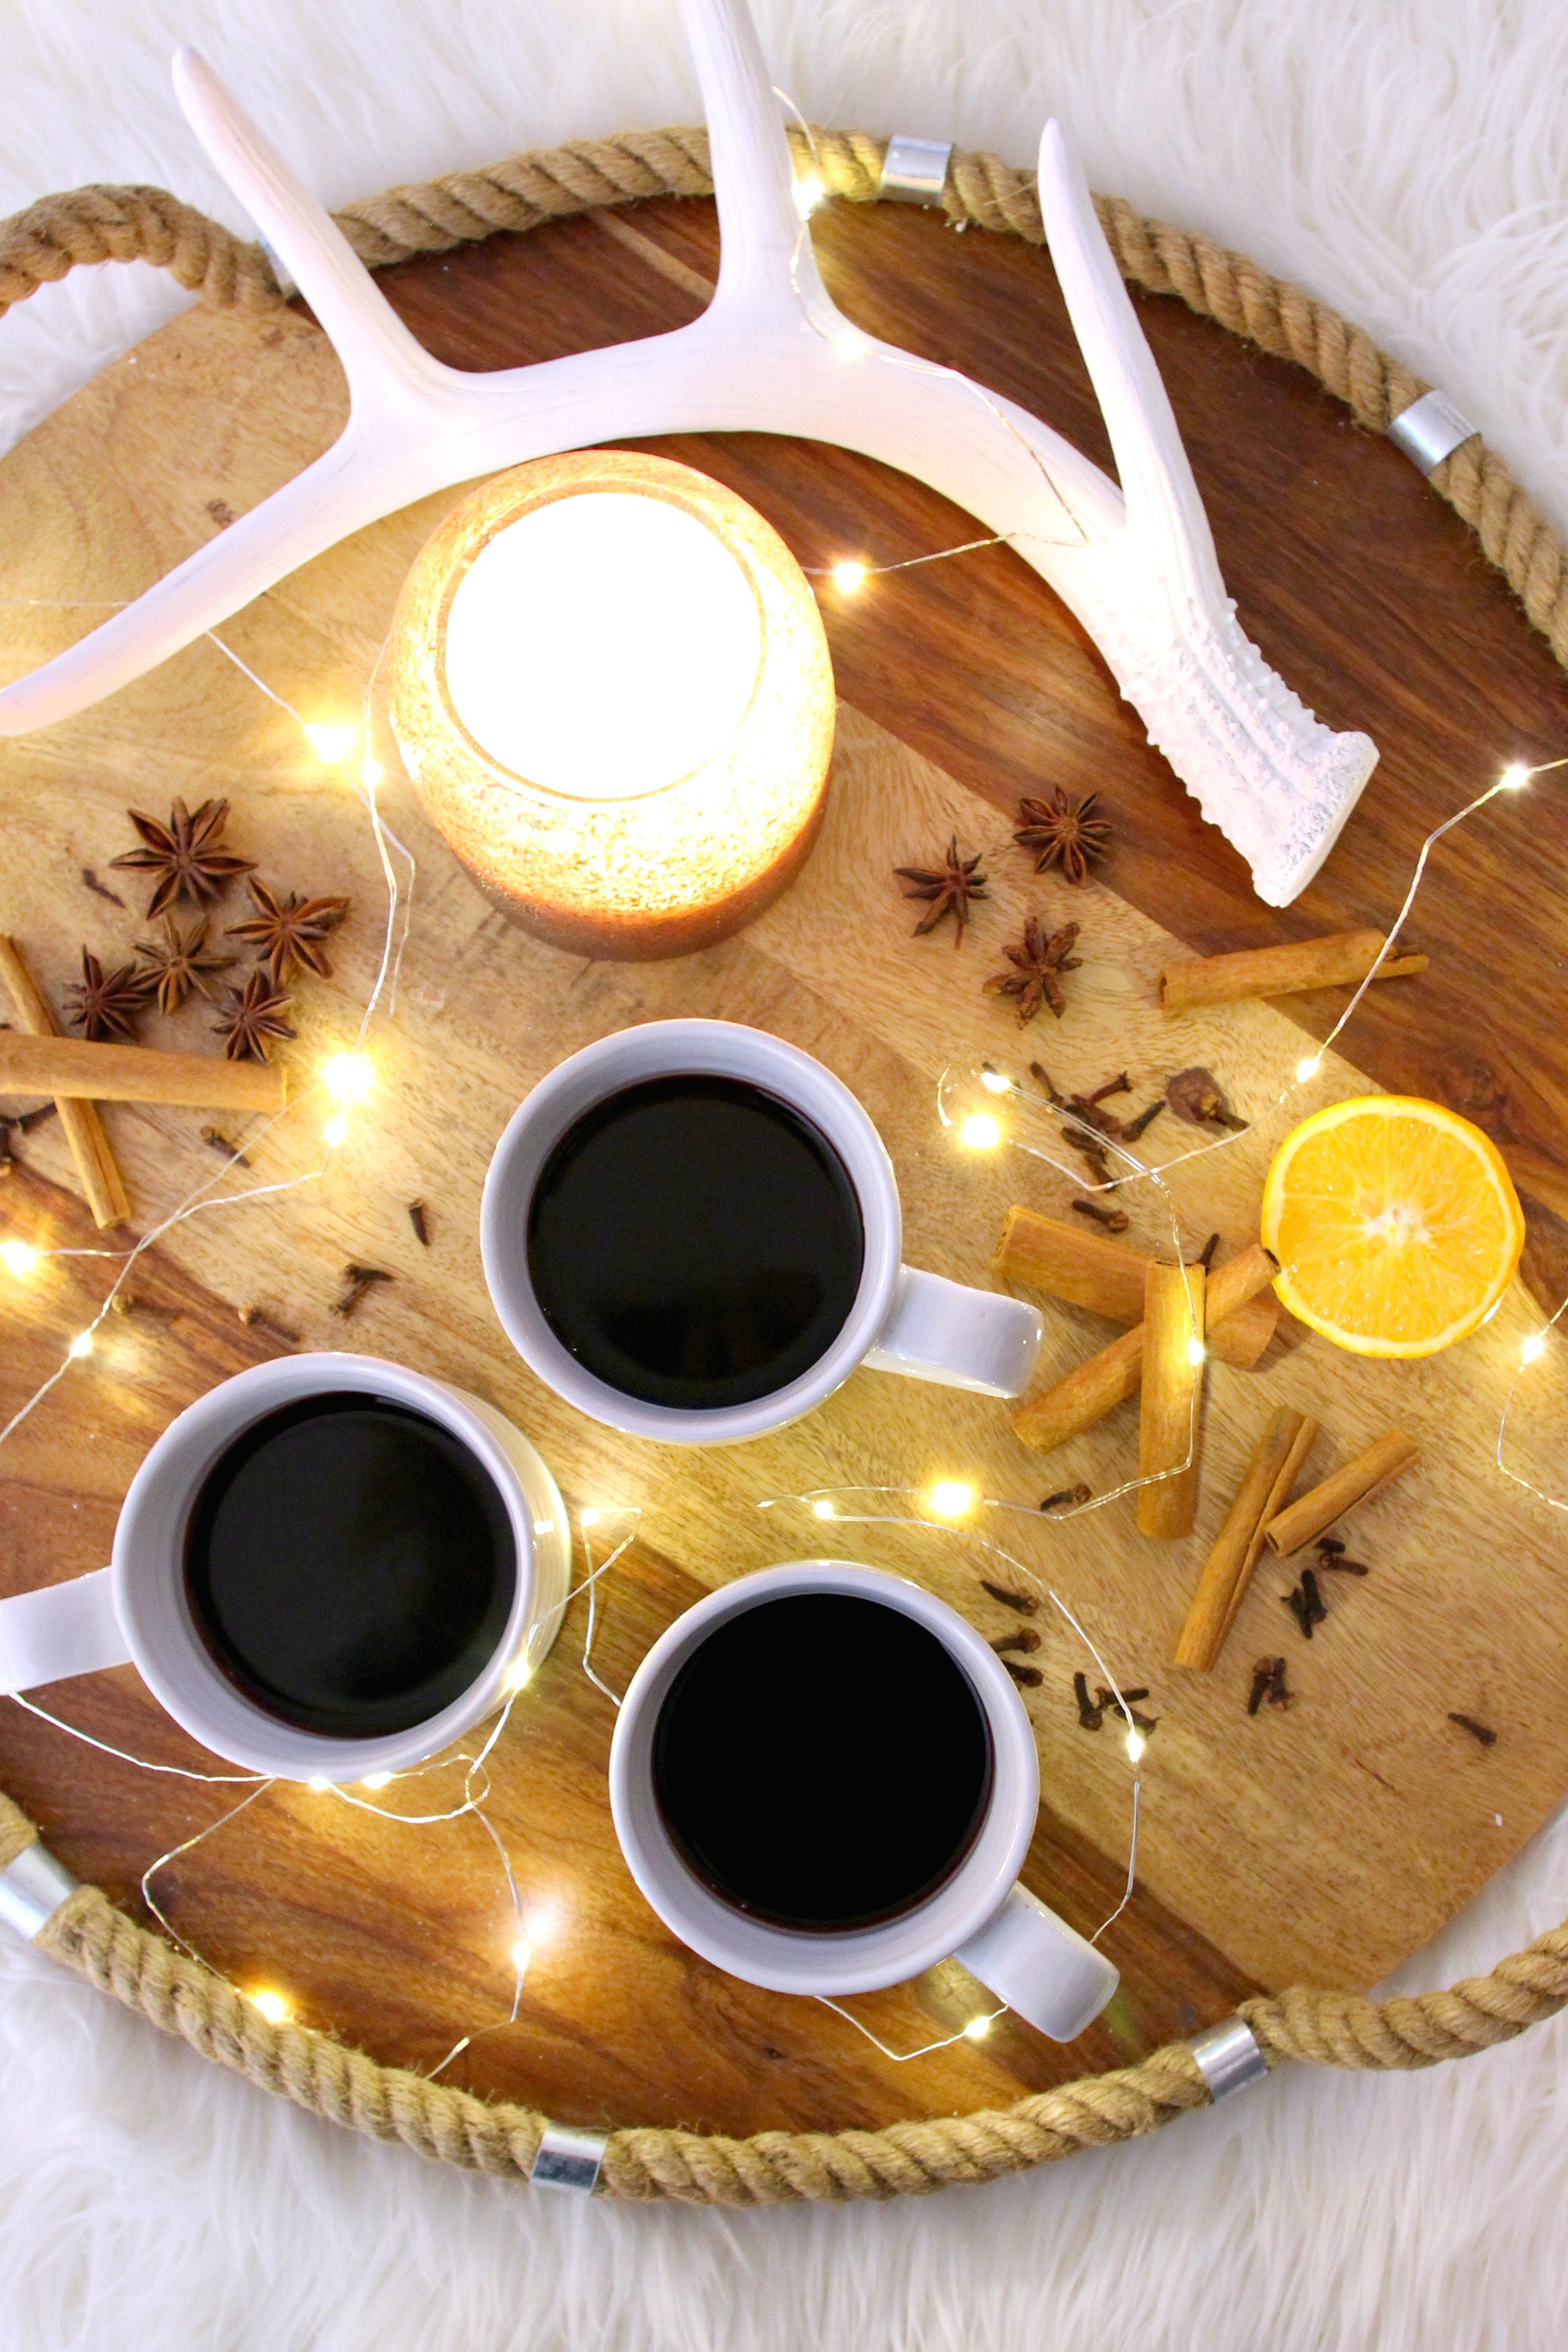 The mulled wine on a wooden tray with faux antlers, cut orange and cinnamon sticks.